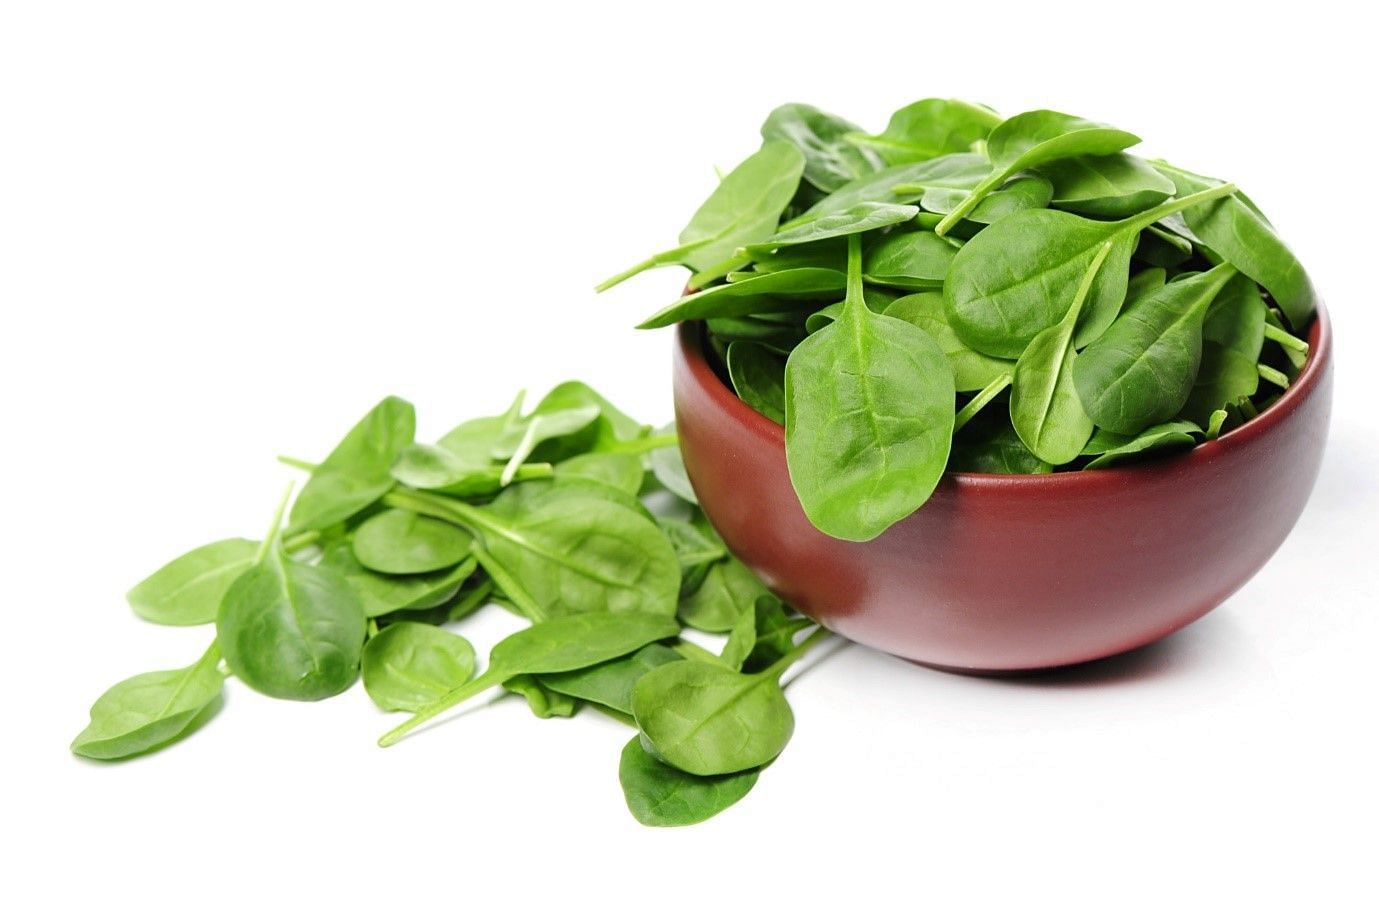 Spinach is one of the vegetables you should eat everyday (image by racool_studio on freepik)